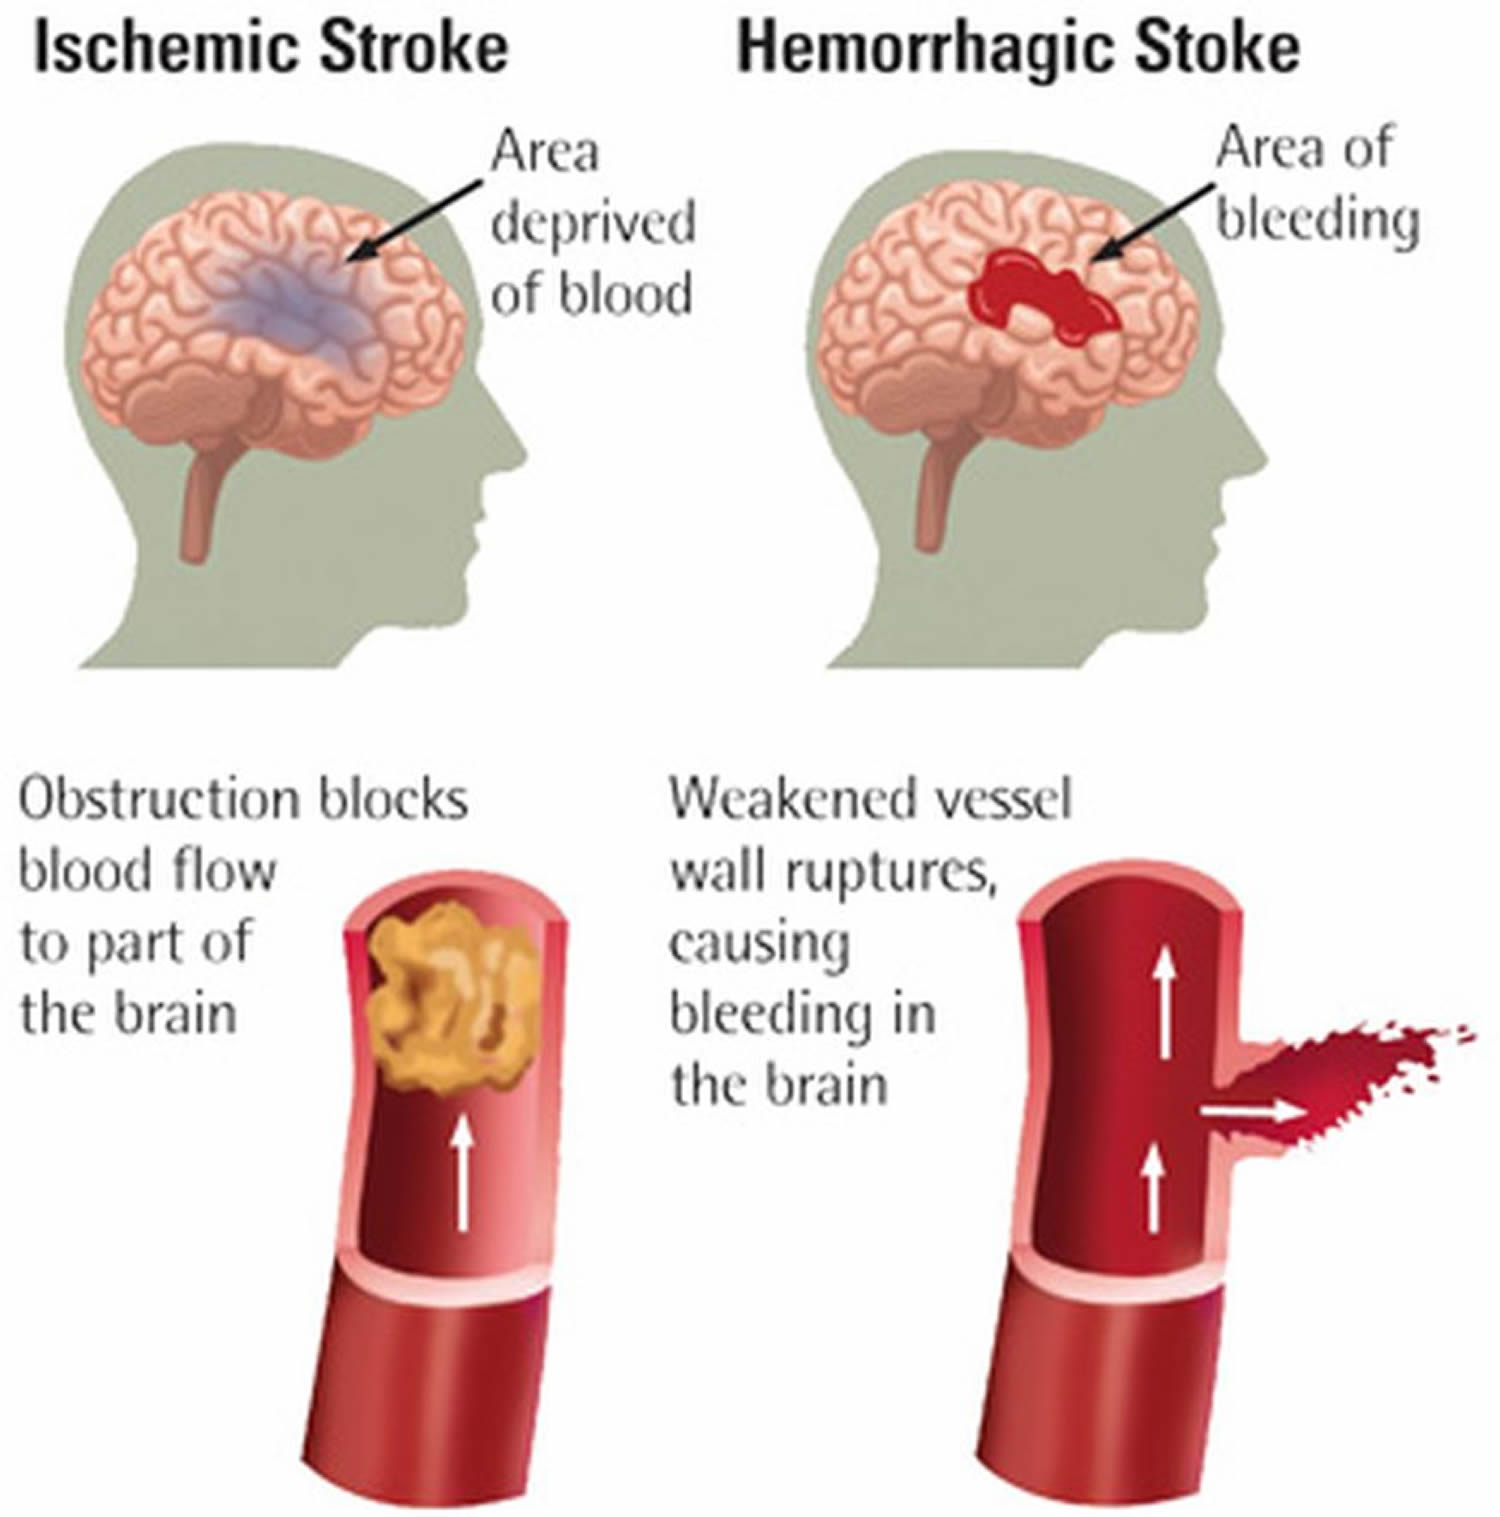 case study about ischemic stroke